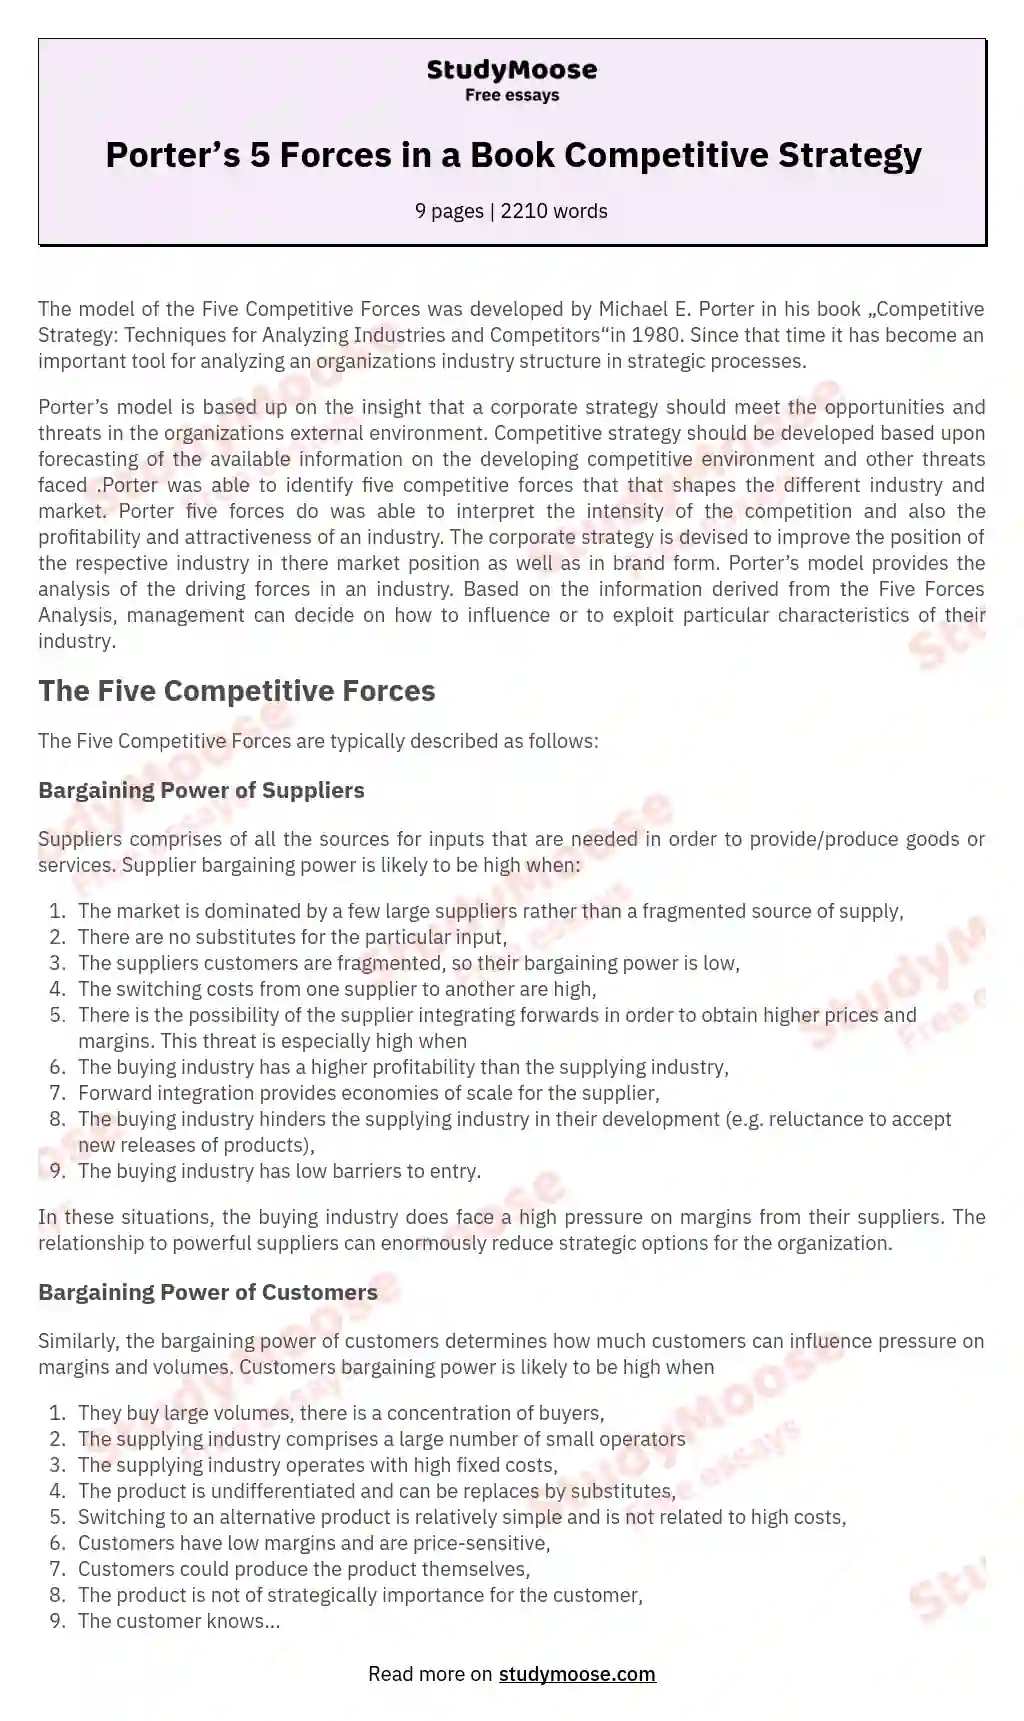 Porter’s 5 Forces in a Book Competitive Strategy